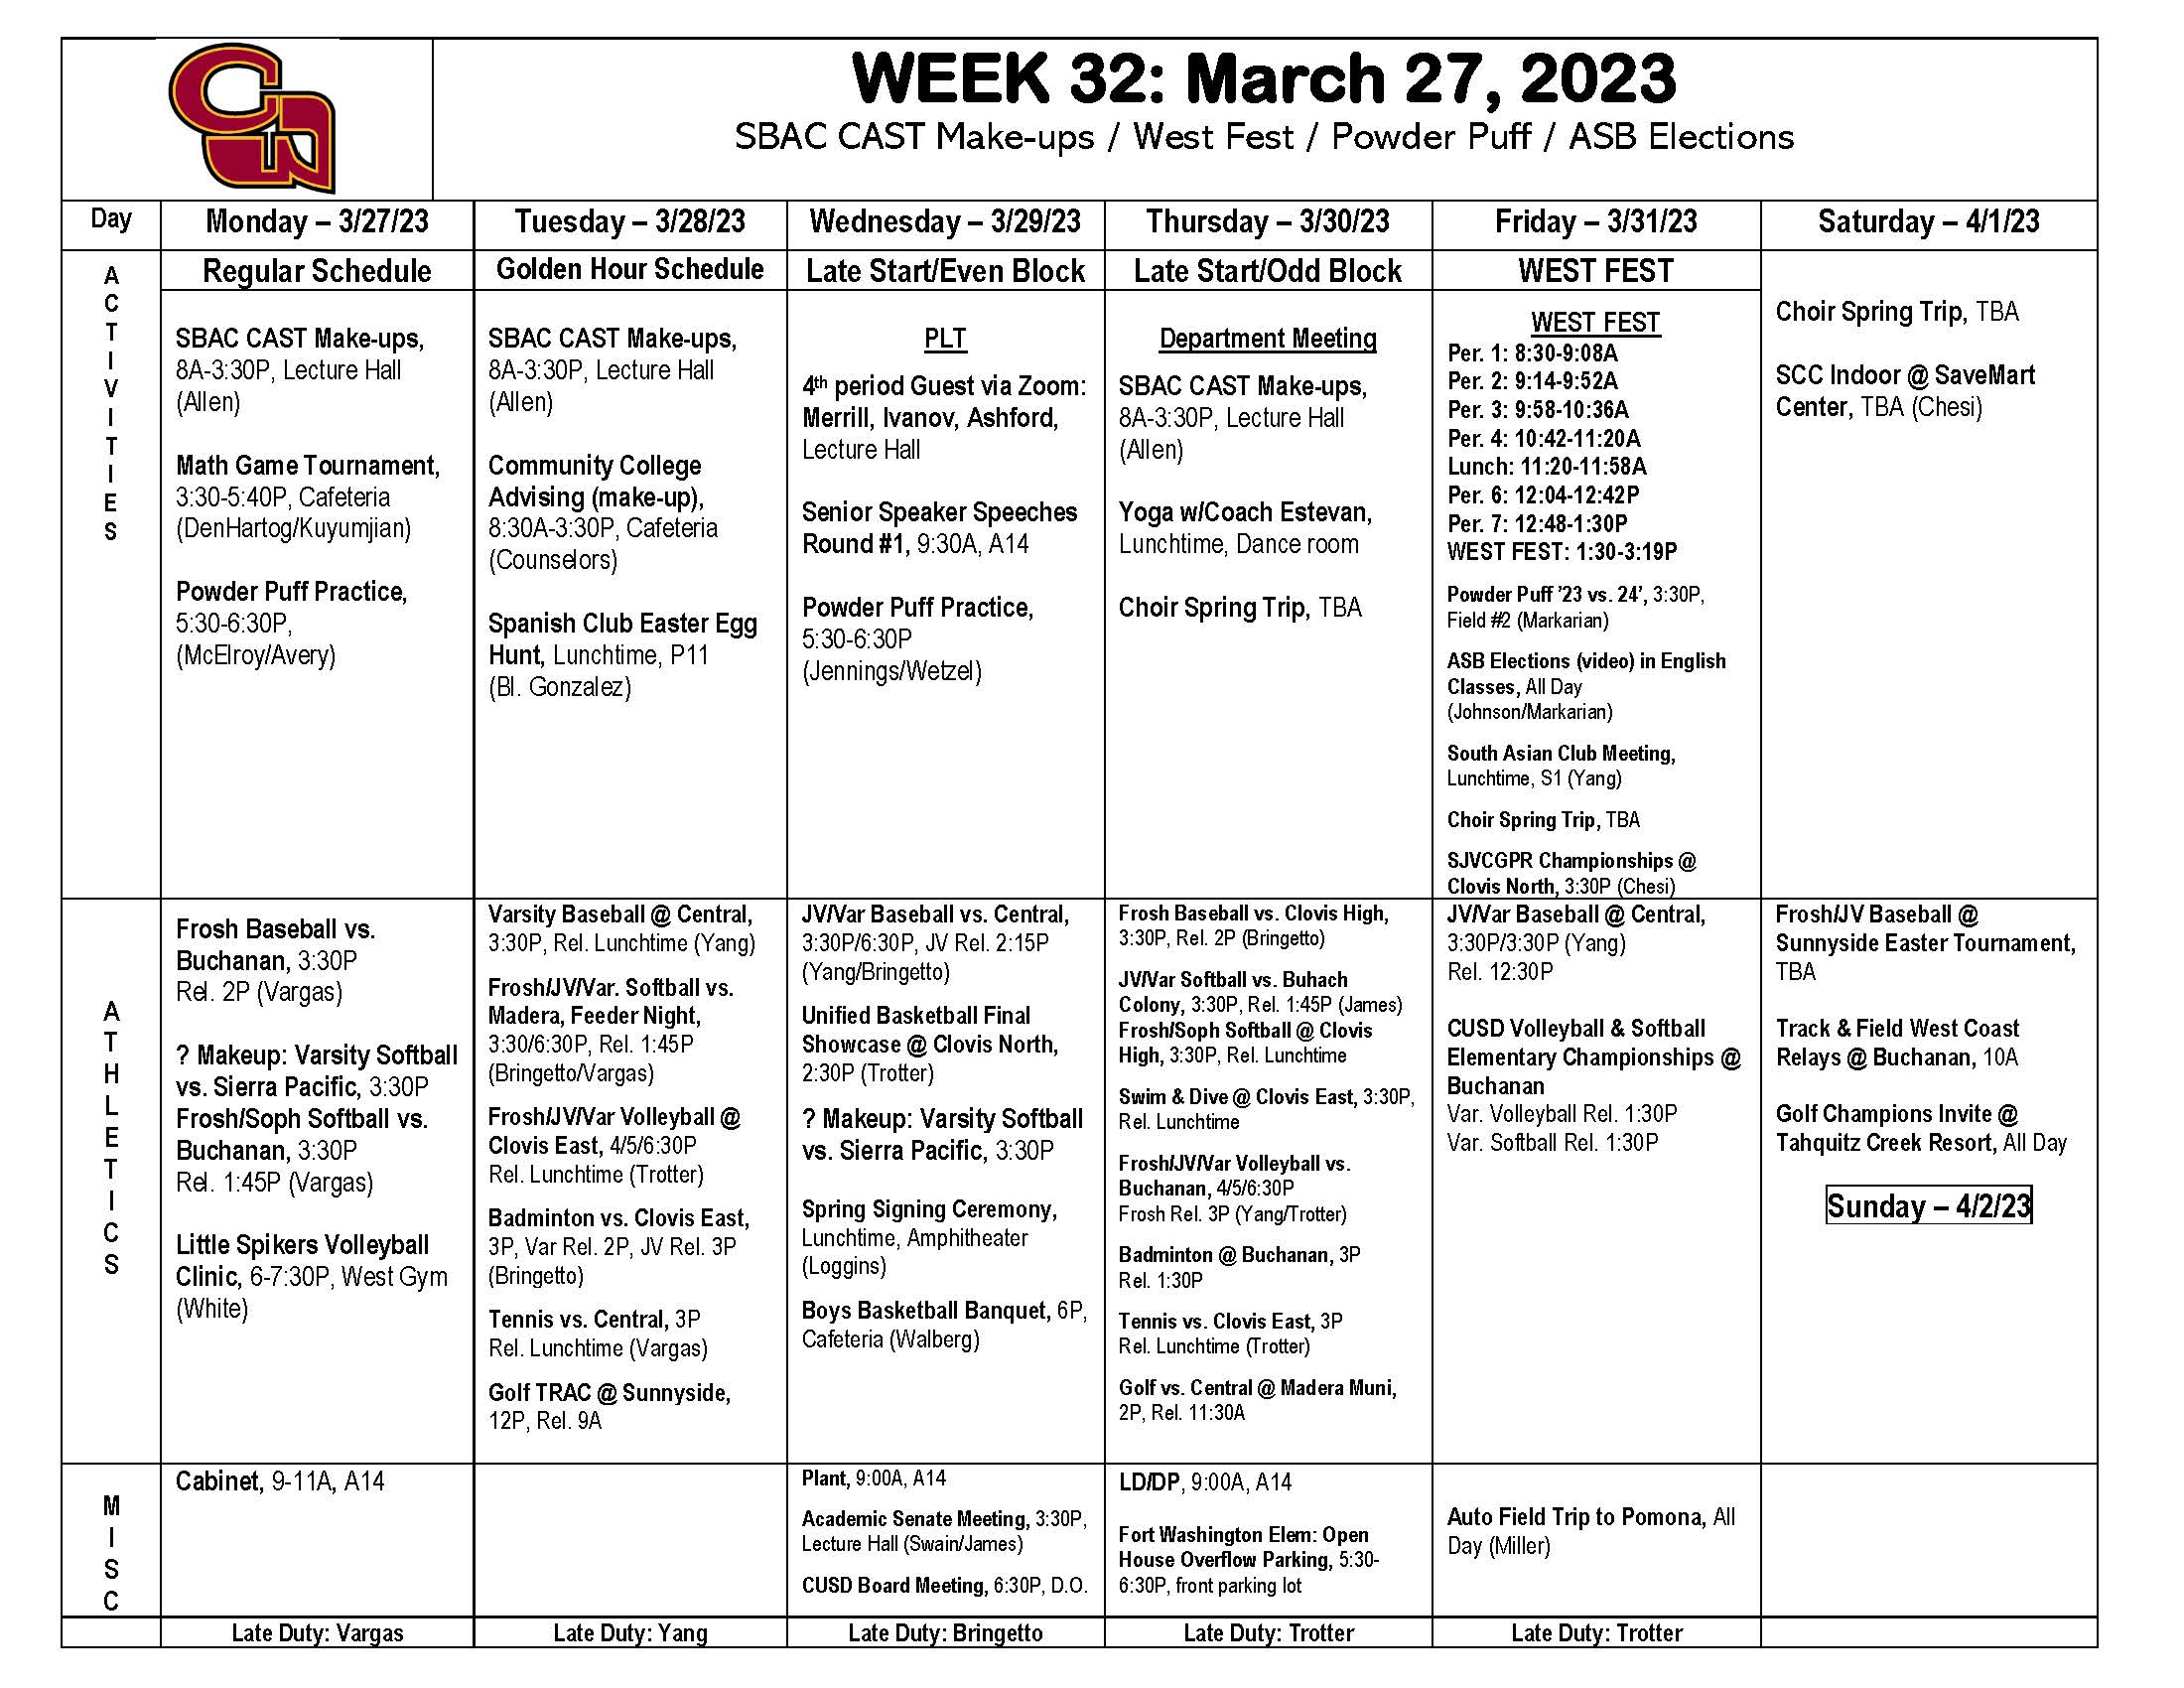 Week of March 27th, 2023